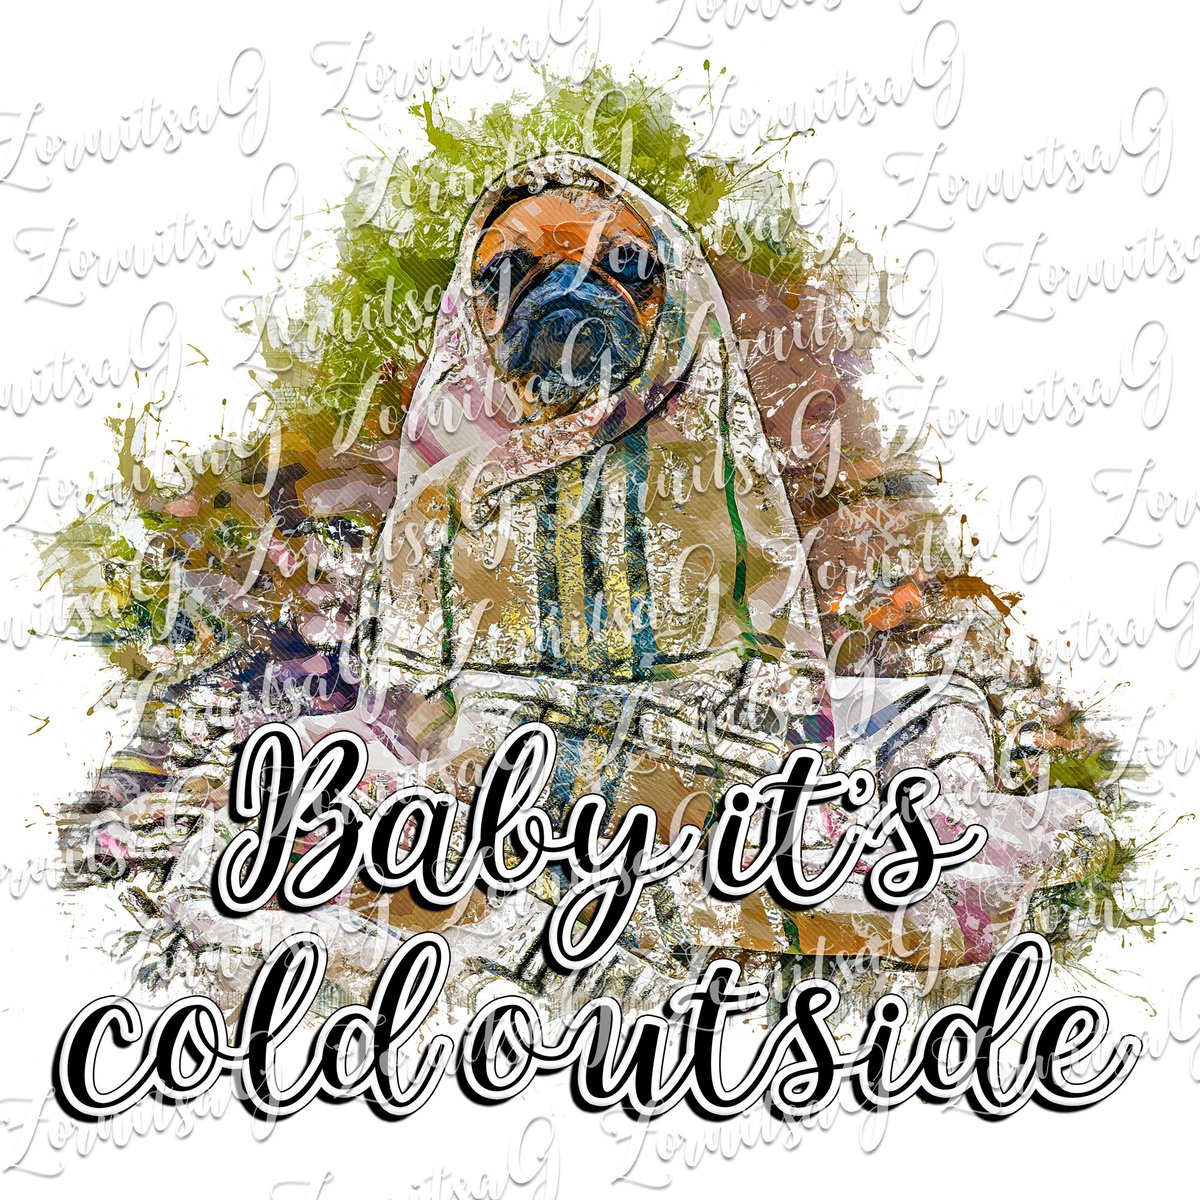 Baby it's cold outside png, cute pug, digital download, etsy.me/2DmOXLn #art #drawing #digitaldownload #sublimation #waterslide #sublimationdesign #png #pugsublimation #pugwithhat #sublimation #tshirt #etsy #tshirdesign #sublimationprinting #digitaldownload